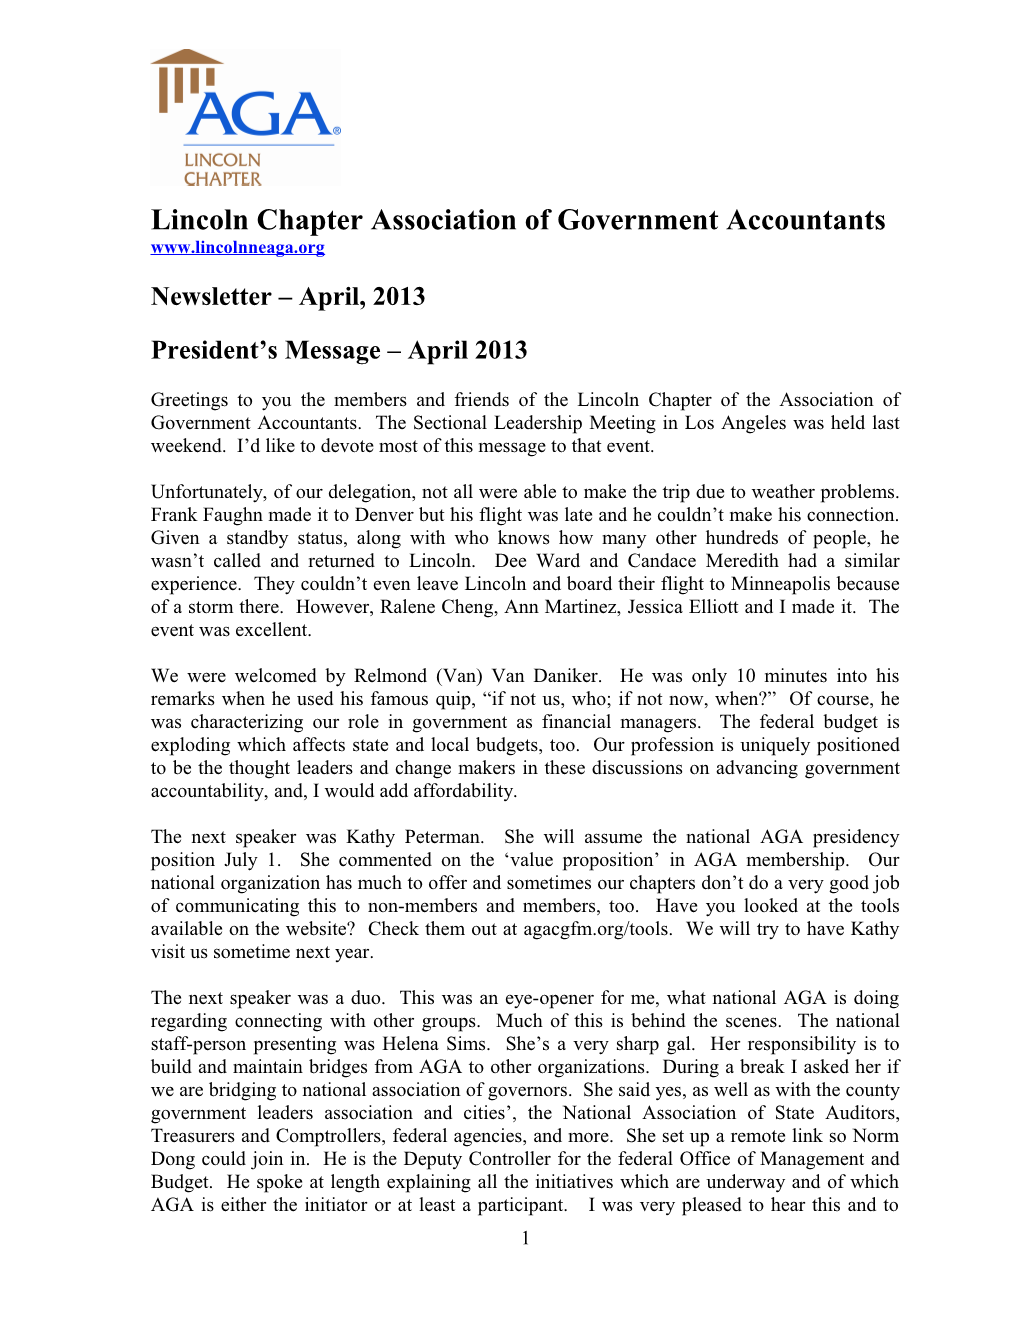 Lincoln Chapterassociation of Government Accountants